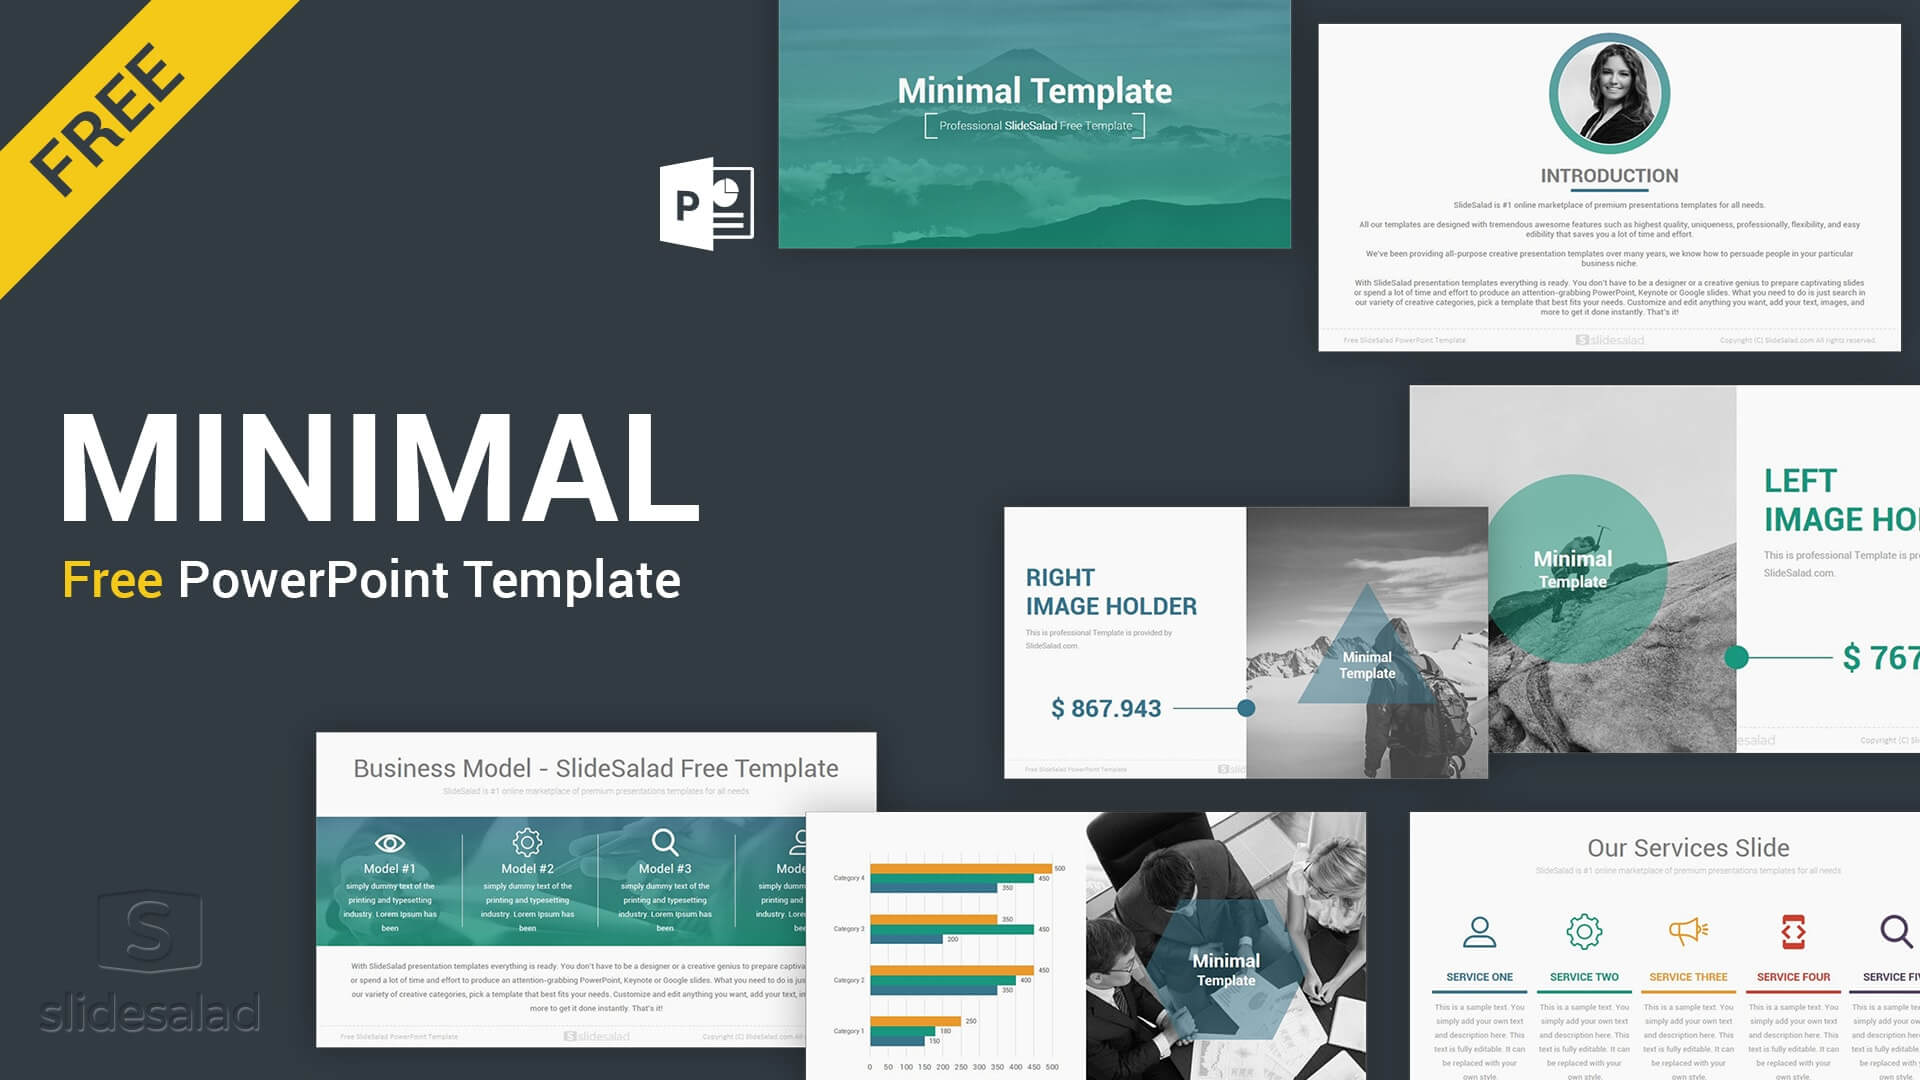 007 Template Ideas Minimal Free Powerpoint Presentation With Regard To Free Powerpoint Presentation Templates Downloads